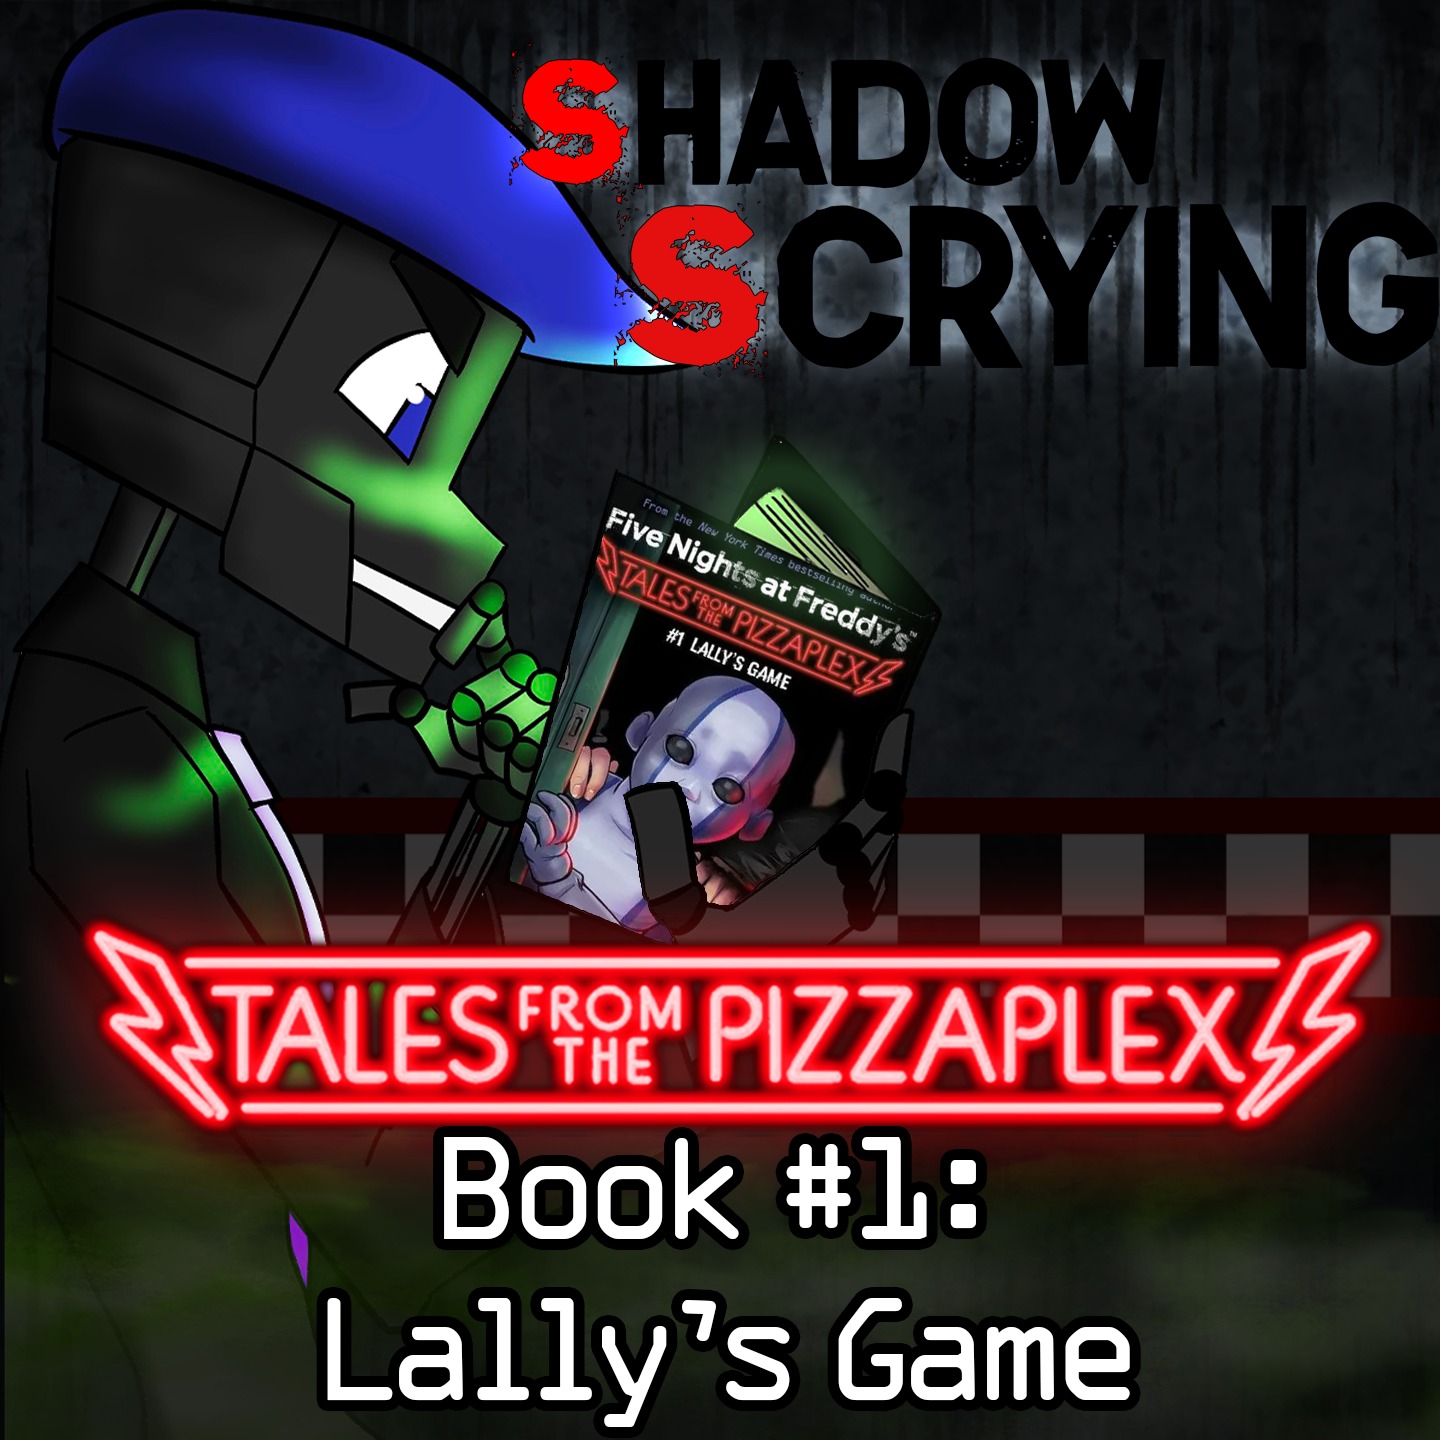 Tales From The PizzaPlex #1 Lally's Game - Overview & Review (Shadow Scrying)